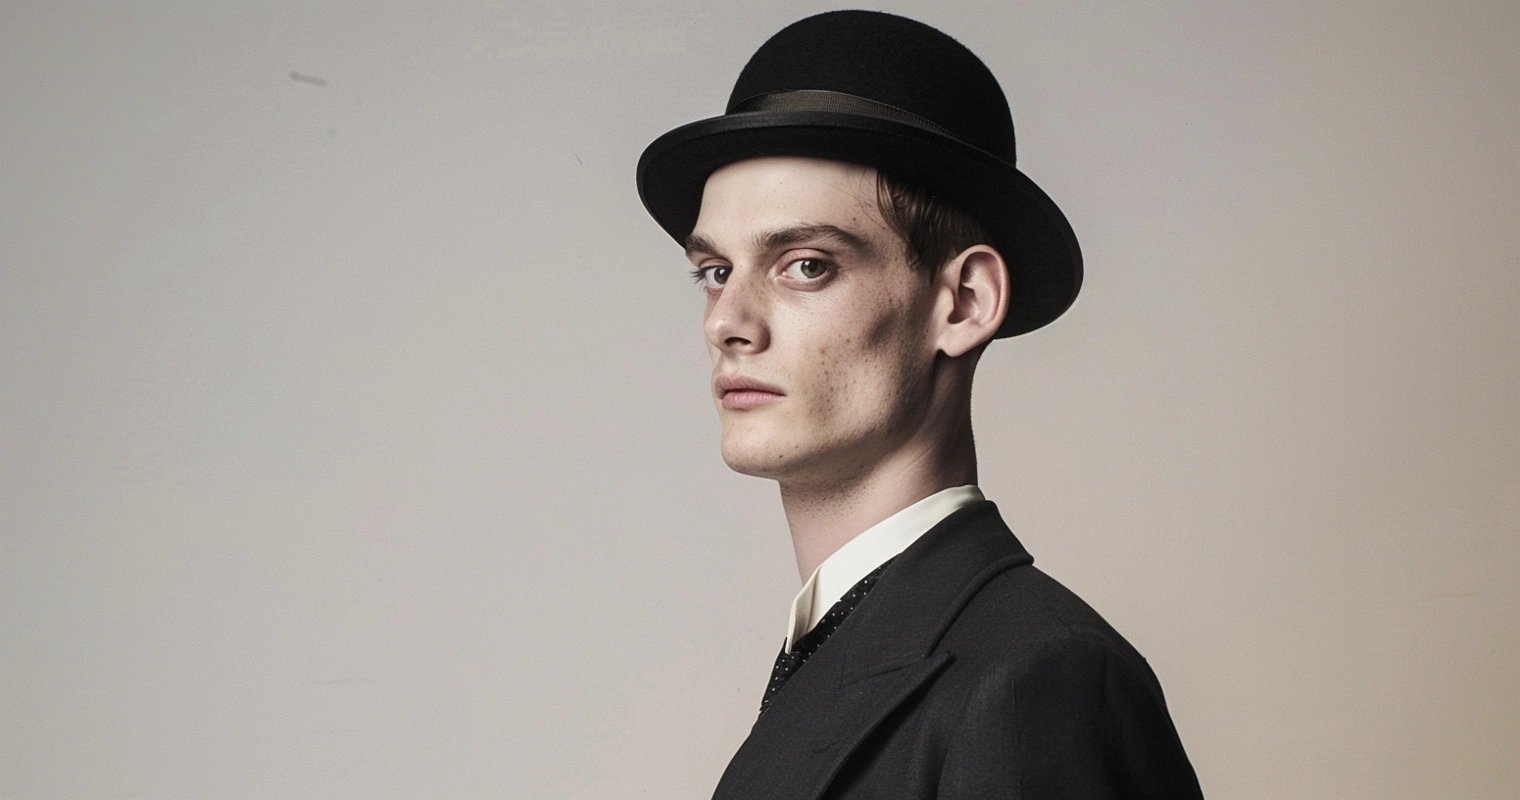 Portrait of a young man with striking features wearing a classic bowler hat and a black suit, set against a simple studio backdrop, embodying the timeless elegance of the bowler hat.